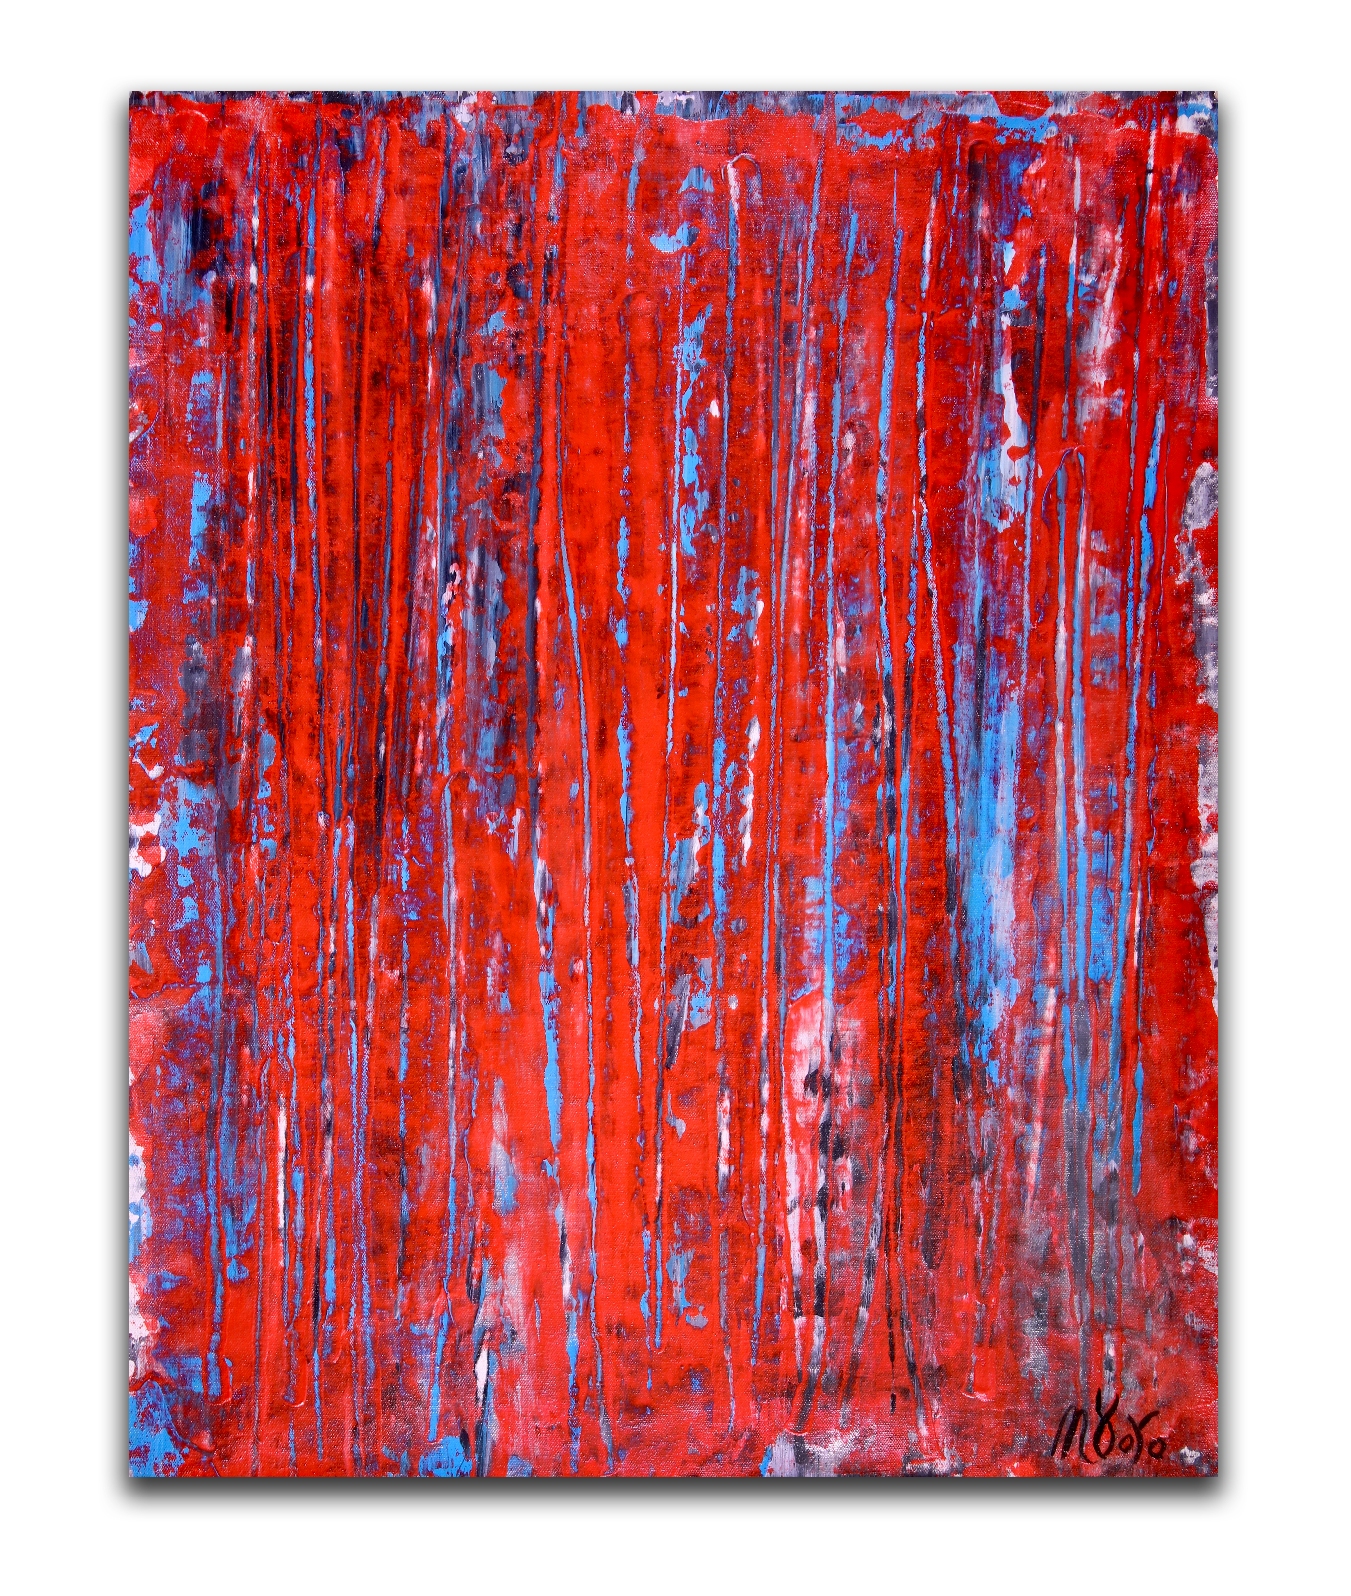 Red spectra (USA) (2018) Expressionistic Abstract Acrylic painting by Nestor Toro